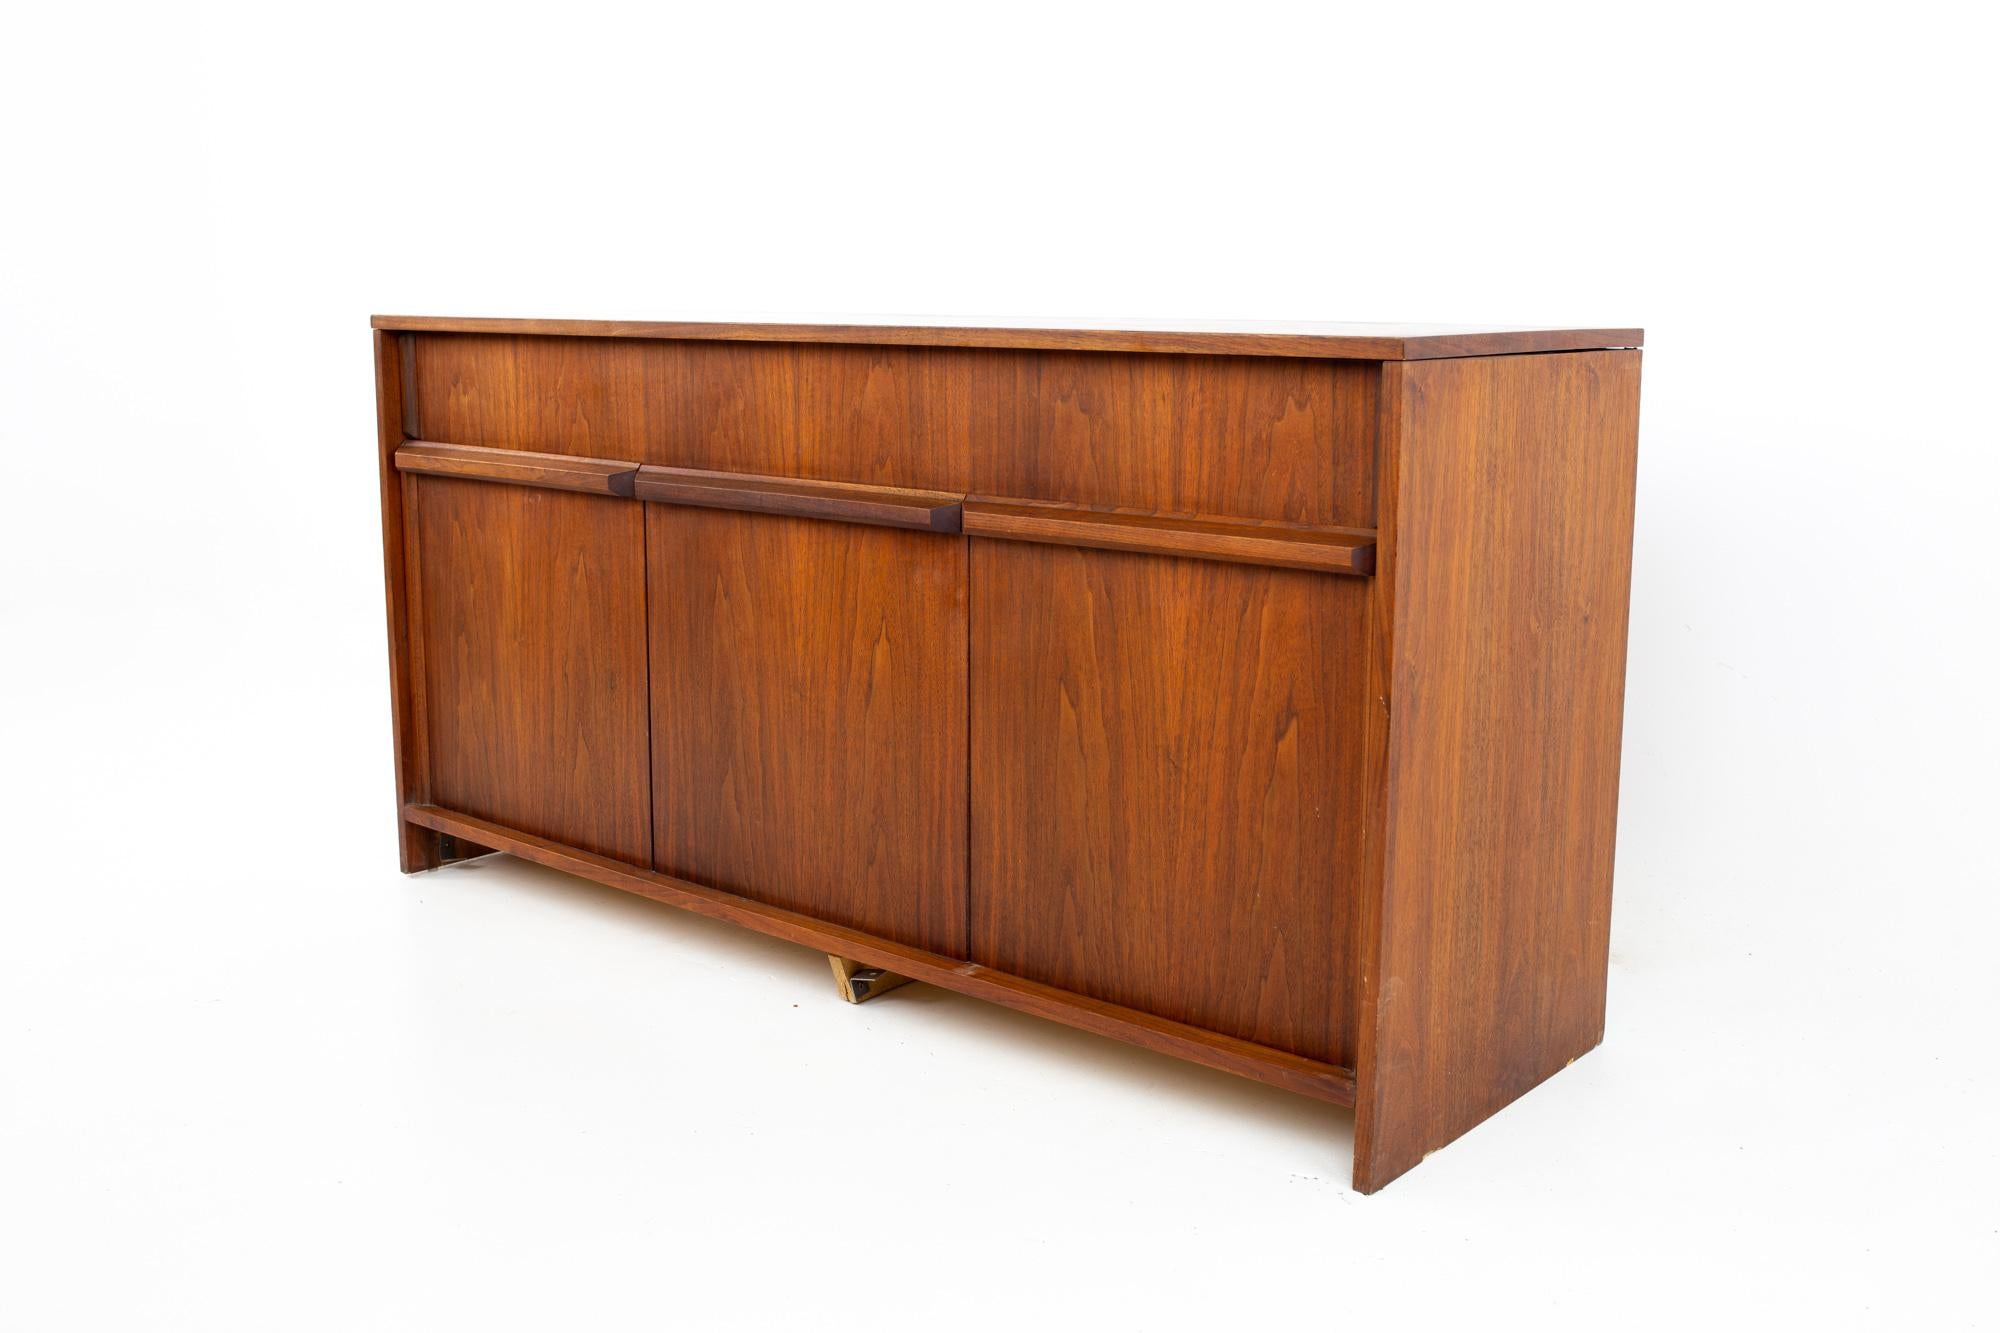 Barzilay mid century stereo console
Console measures: 58.5 wide x 19 deep x 29.25 inches high 

All pieces of furniture can be had in what we call restored vintage condition. That means the piece is restored upon purchase so it’s free of